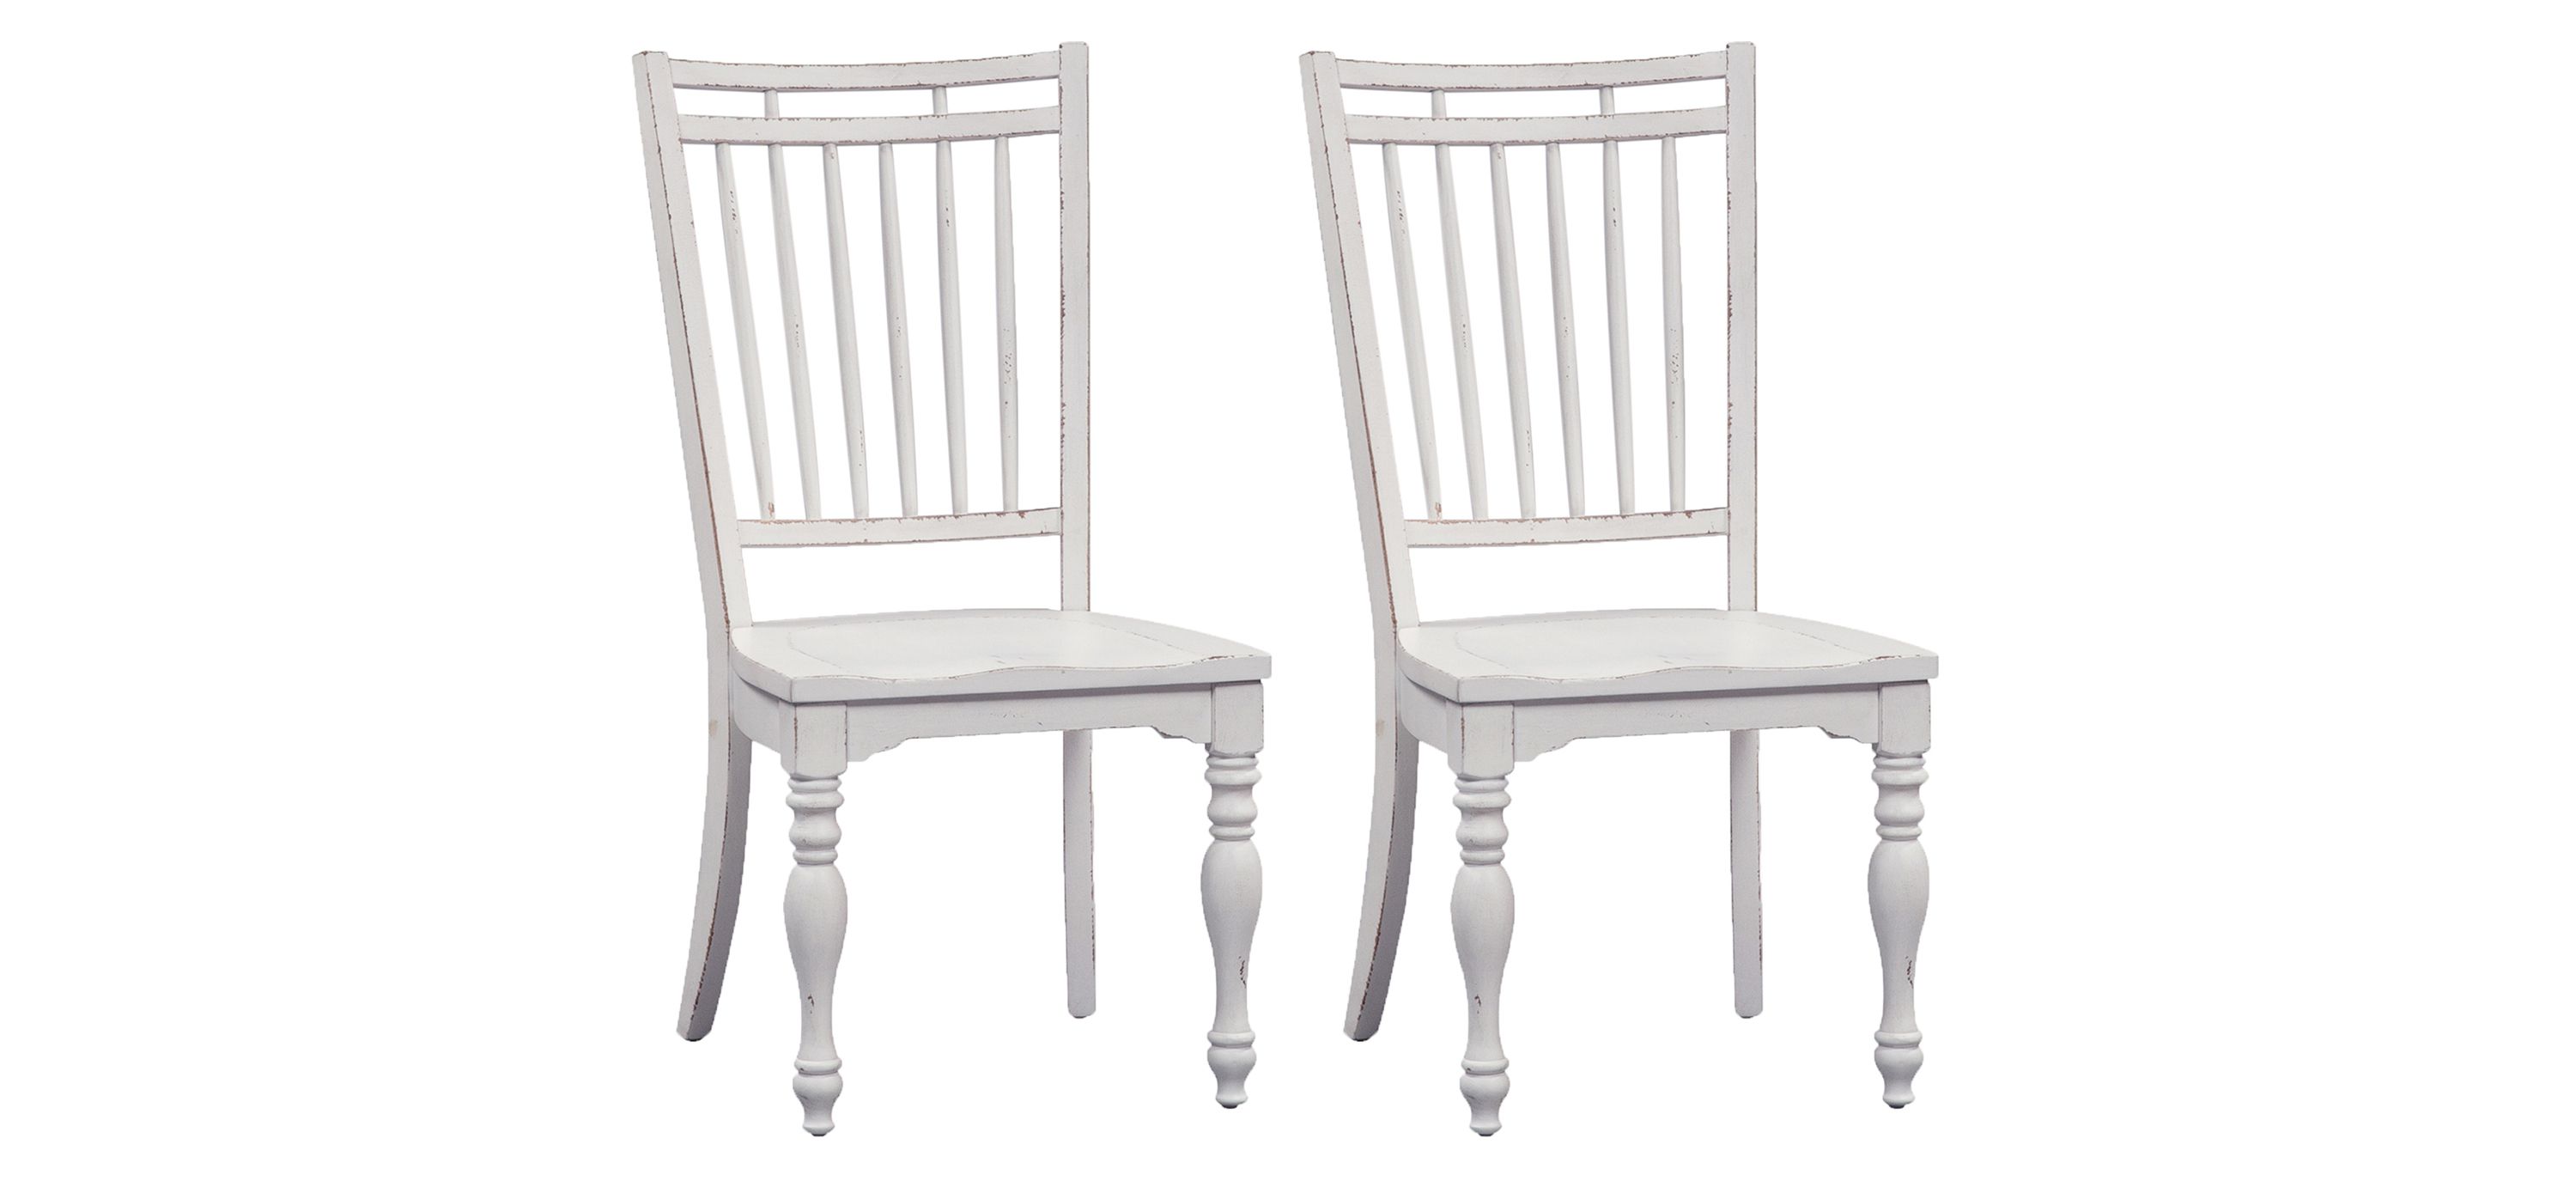 Forestport Spindle Back Dining Chair-Set of 2